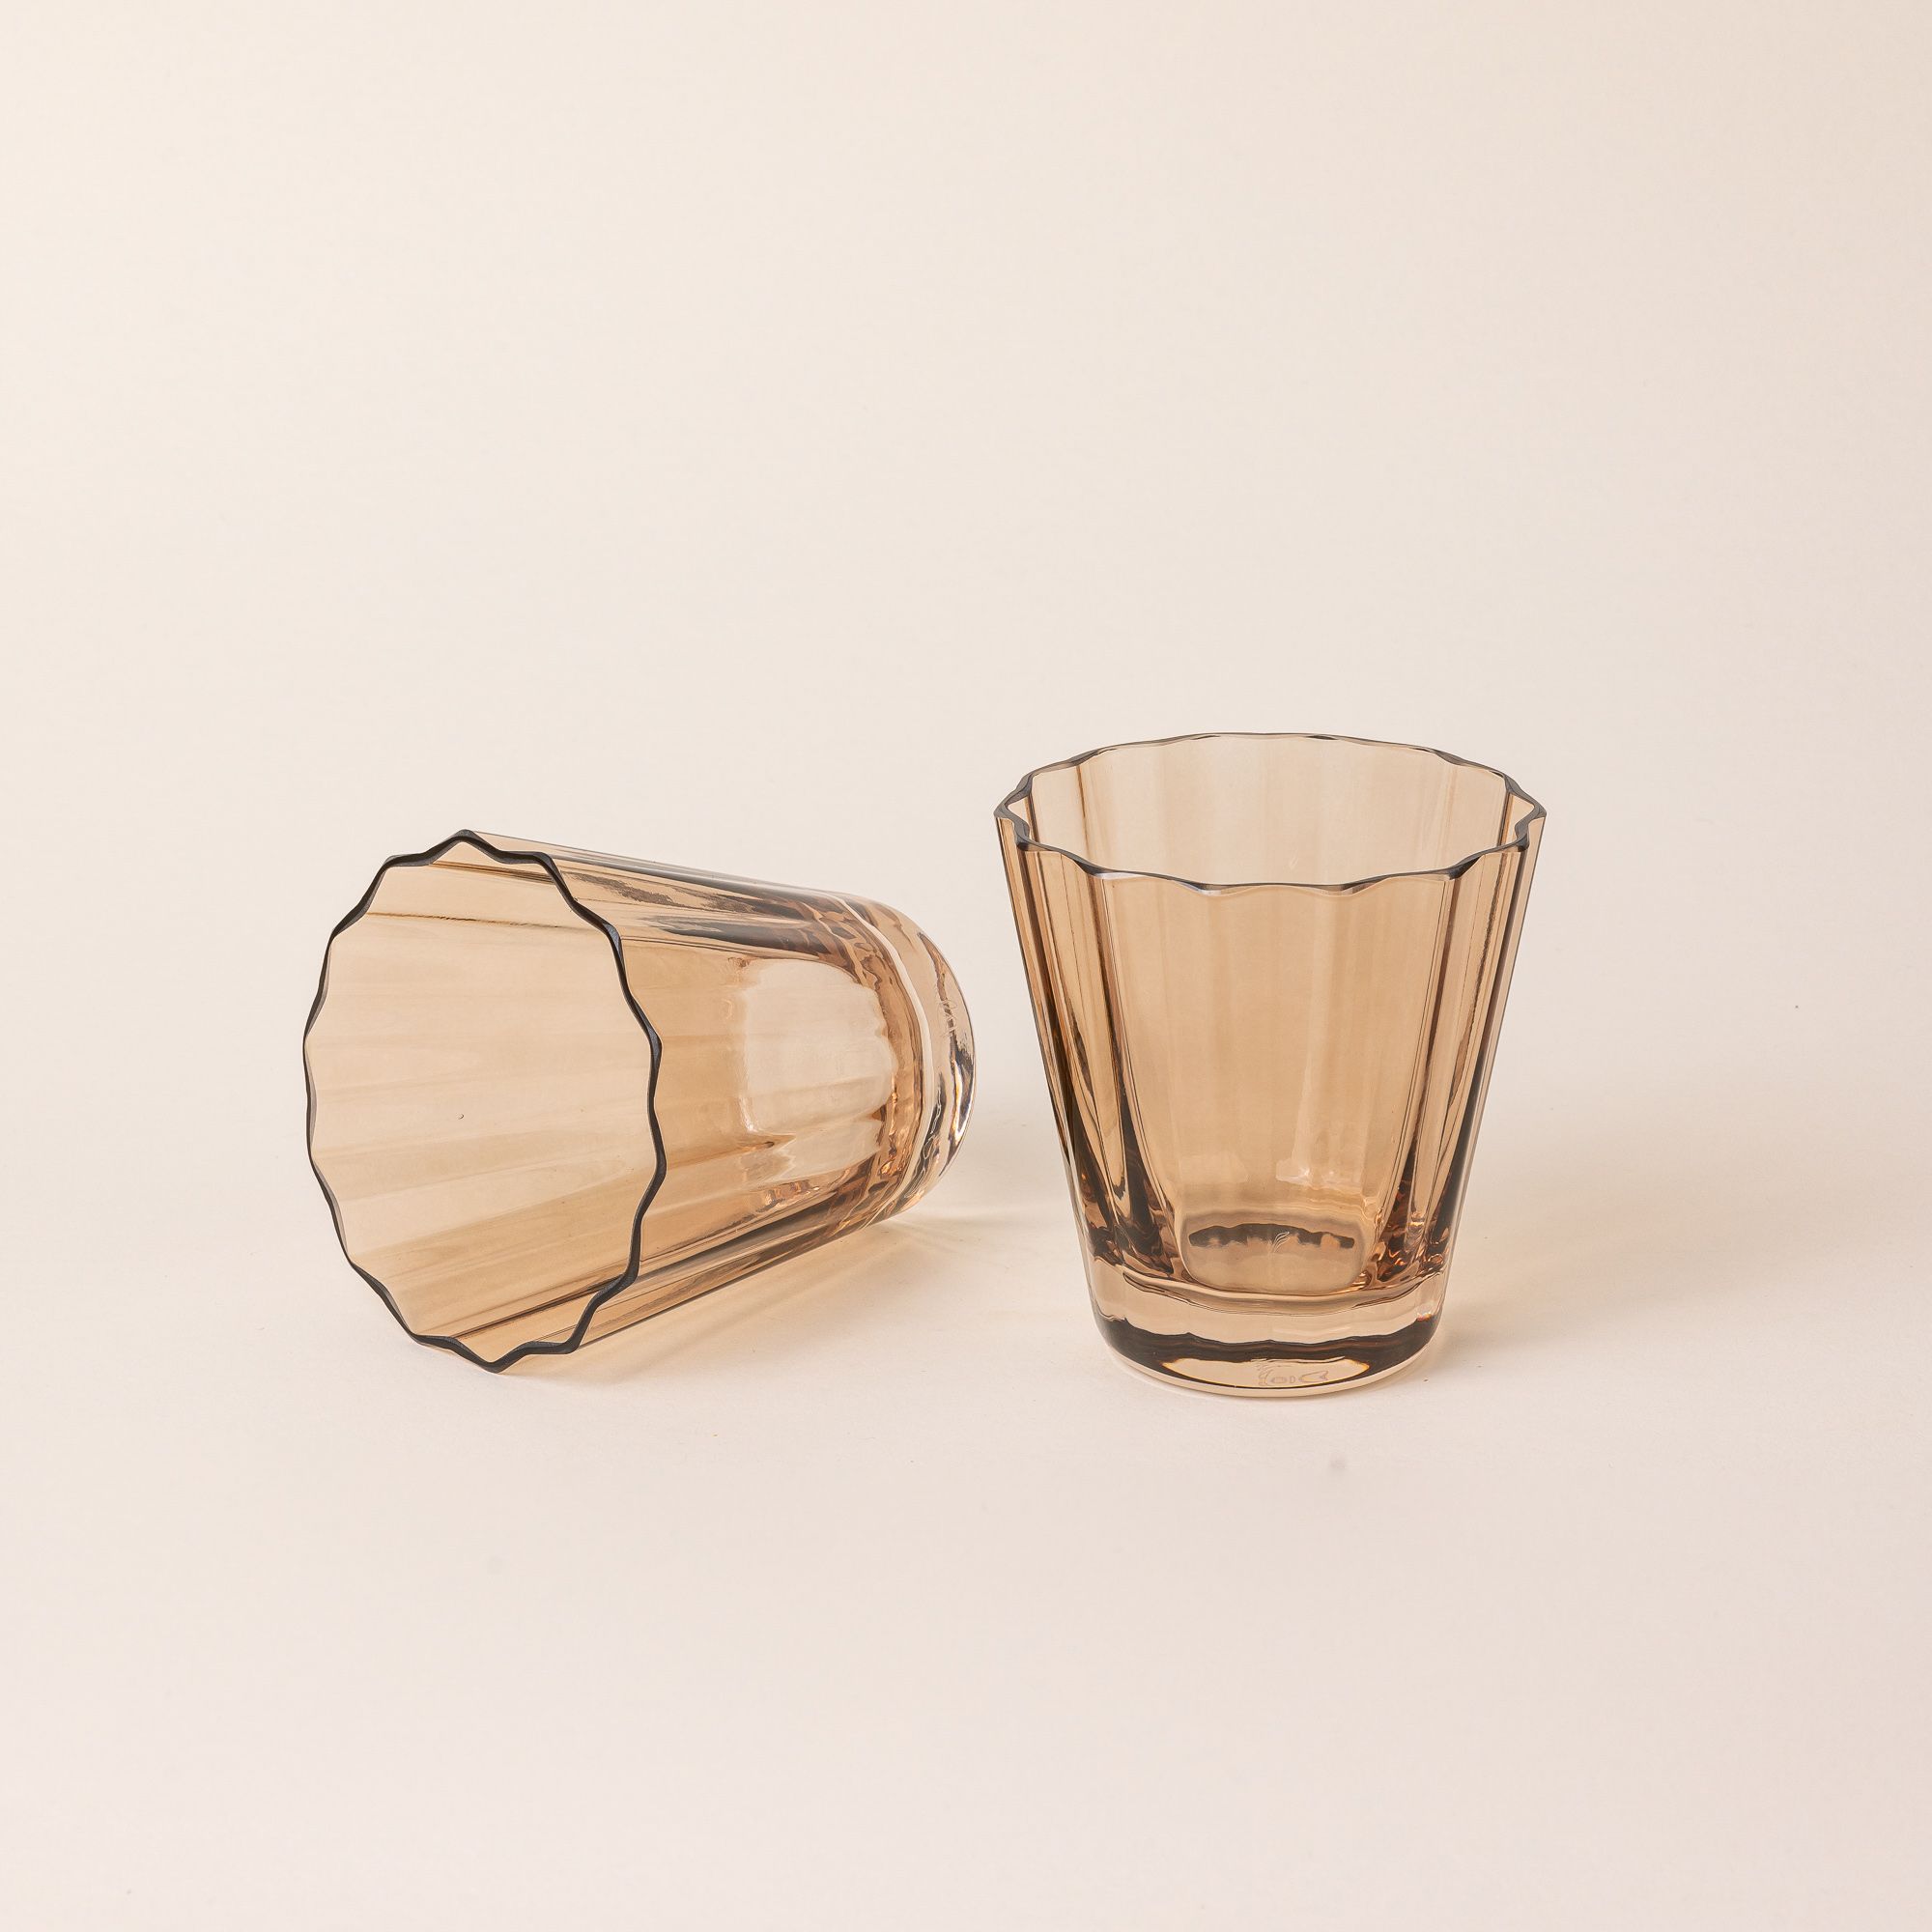 Two transparent light amber glasses with wide grooves on the side. One sits up right, and one is on its side.